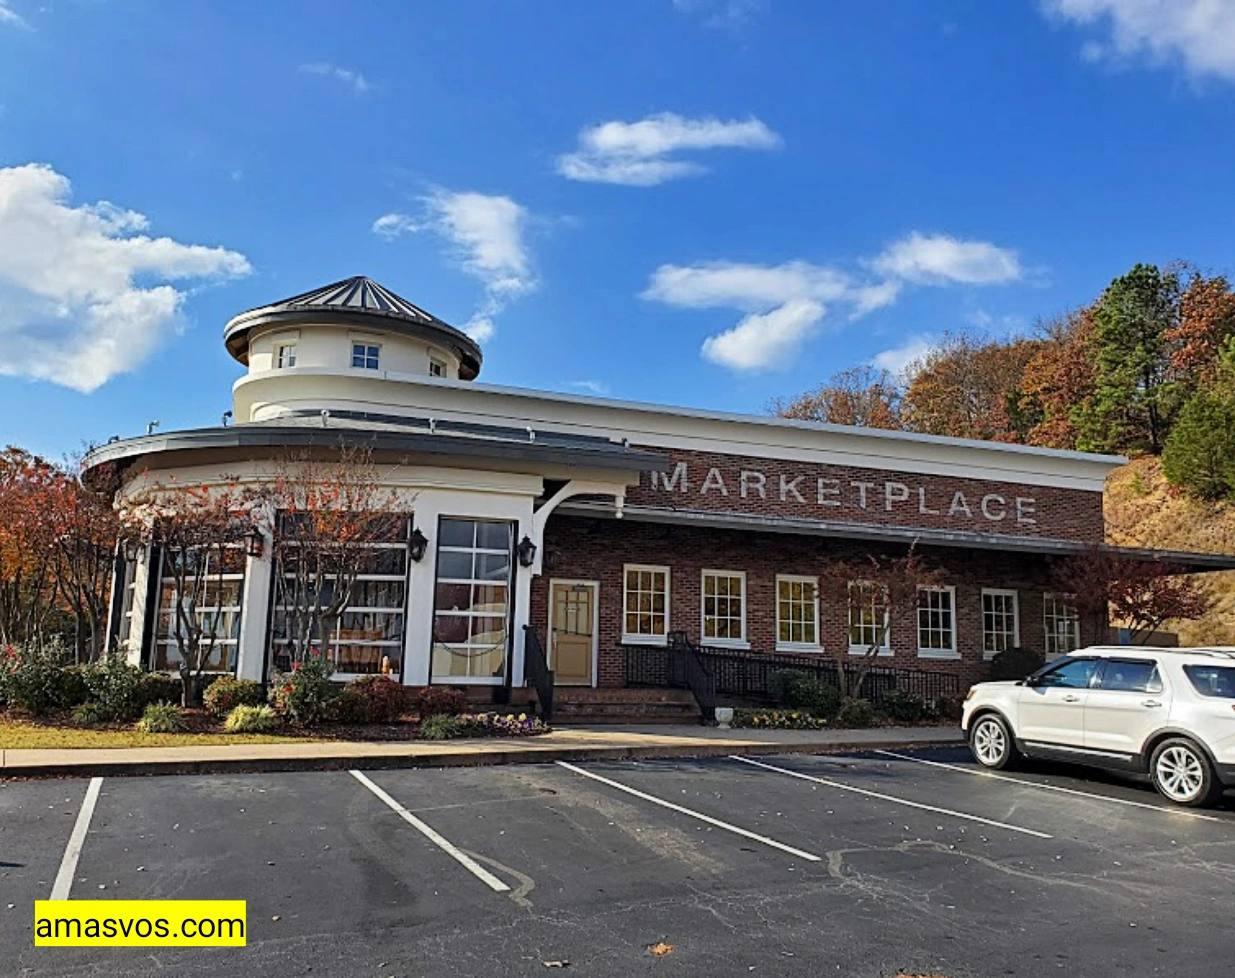 MarketPlace Grill places to eat in conway ar